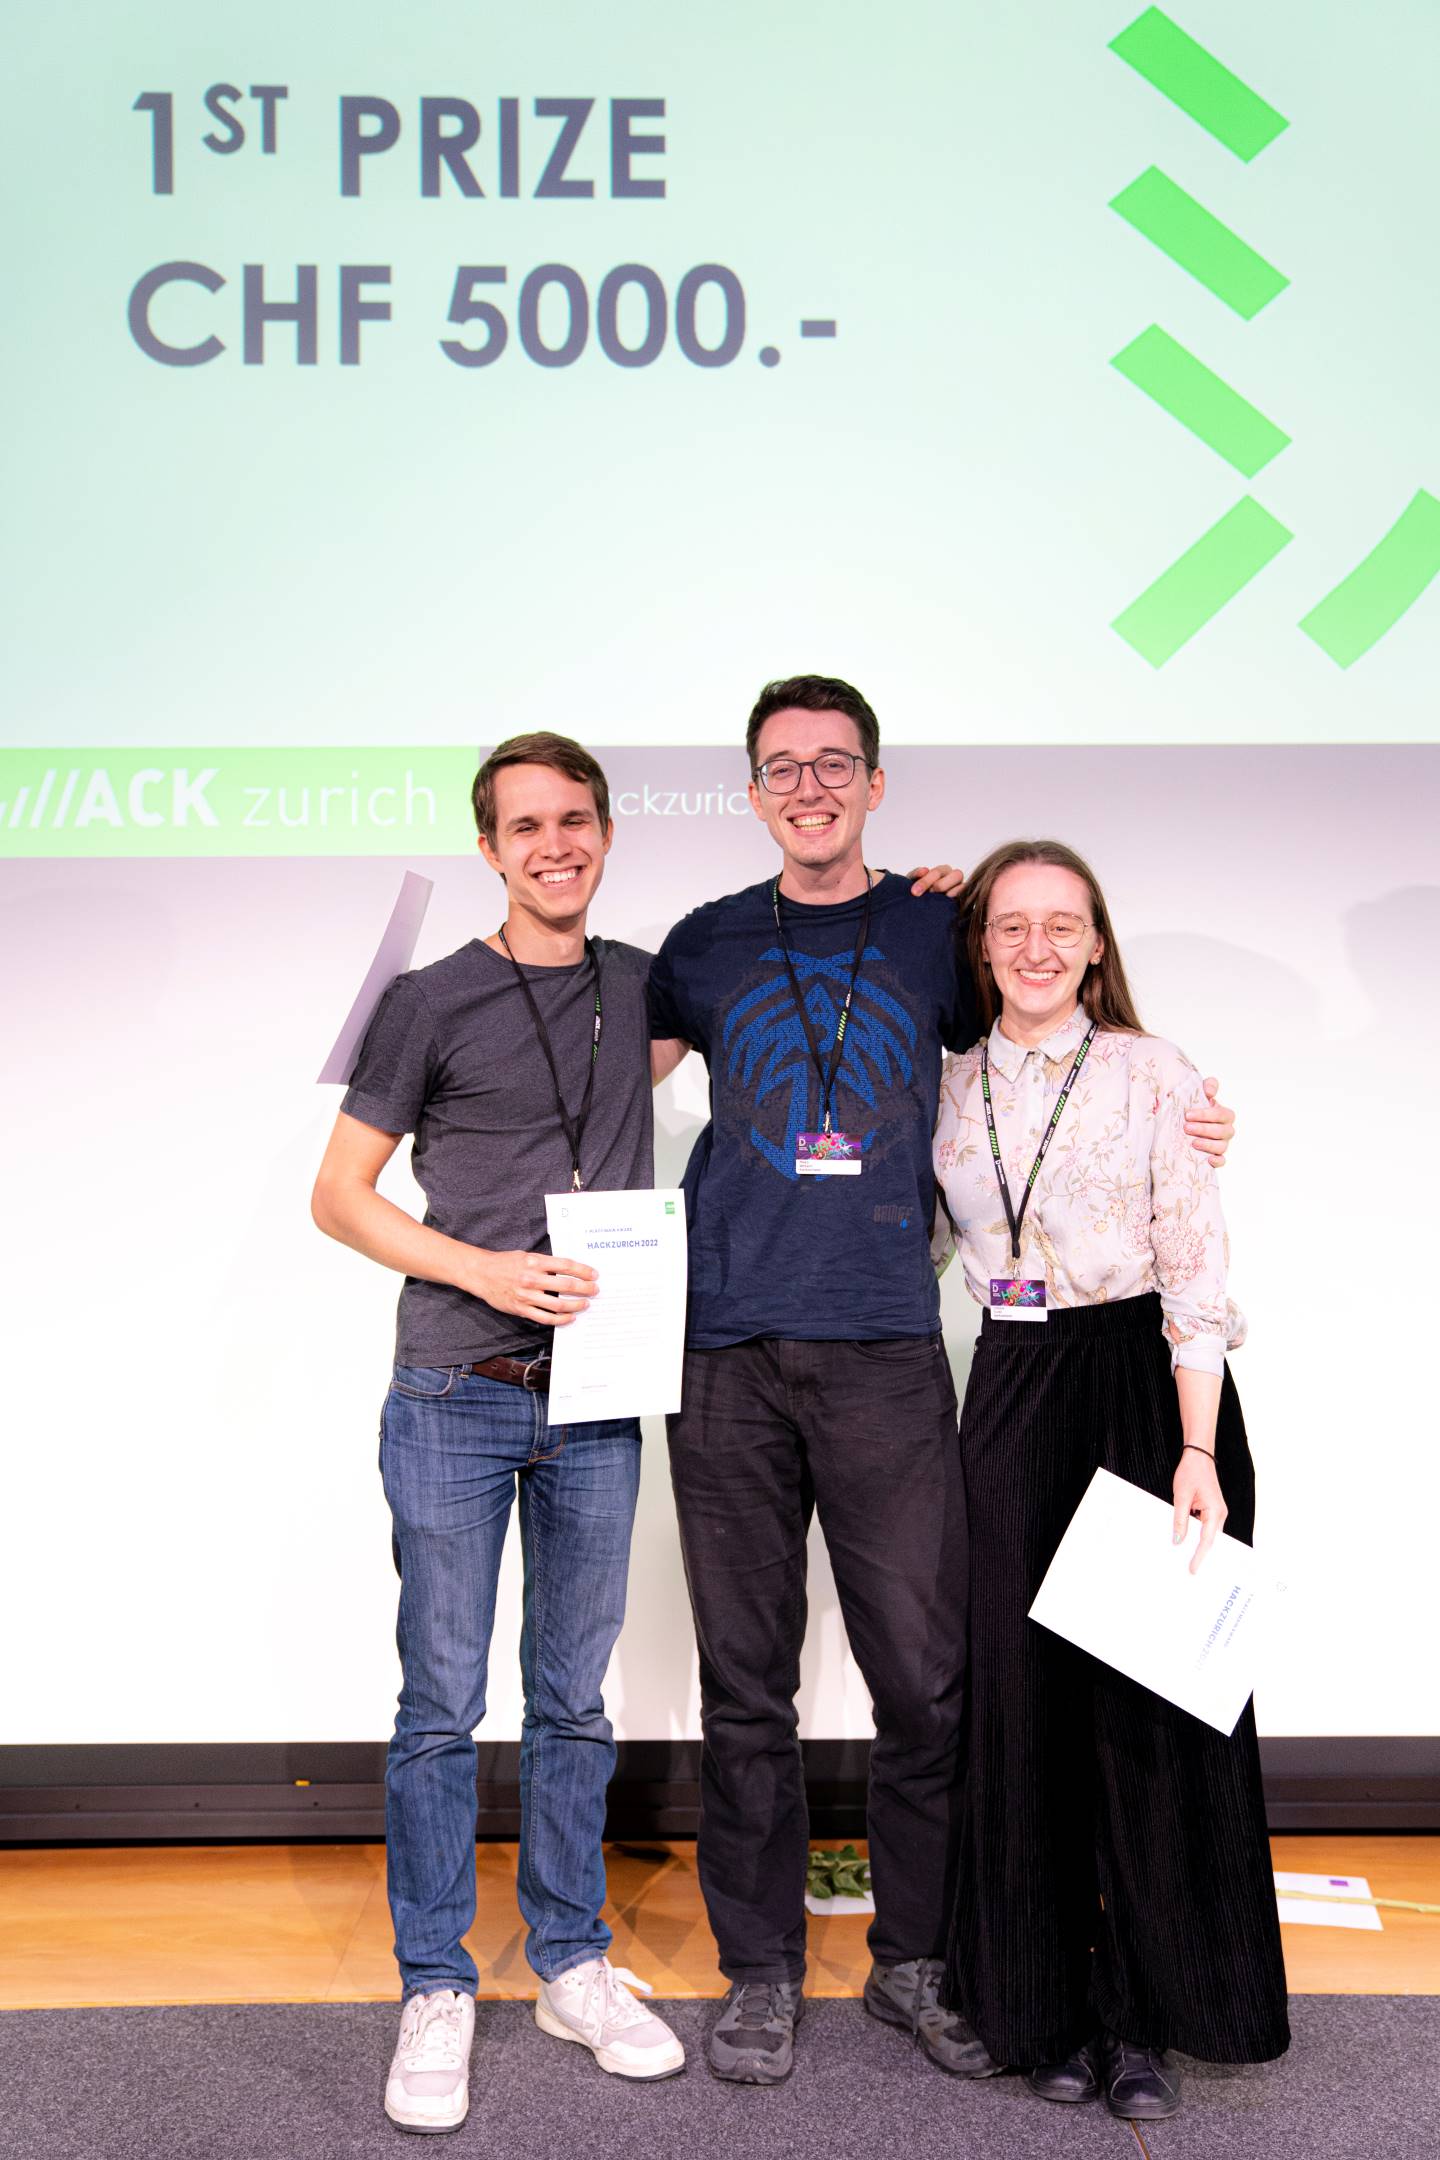 The GridGuard Team on stage winning 1st place of the HackZurich